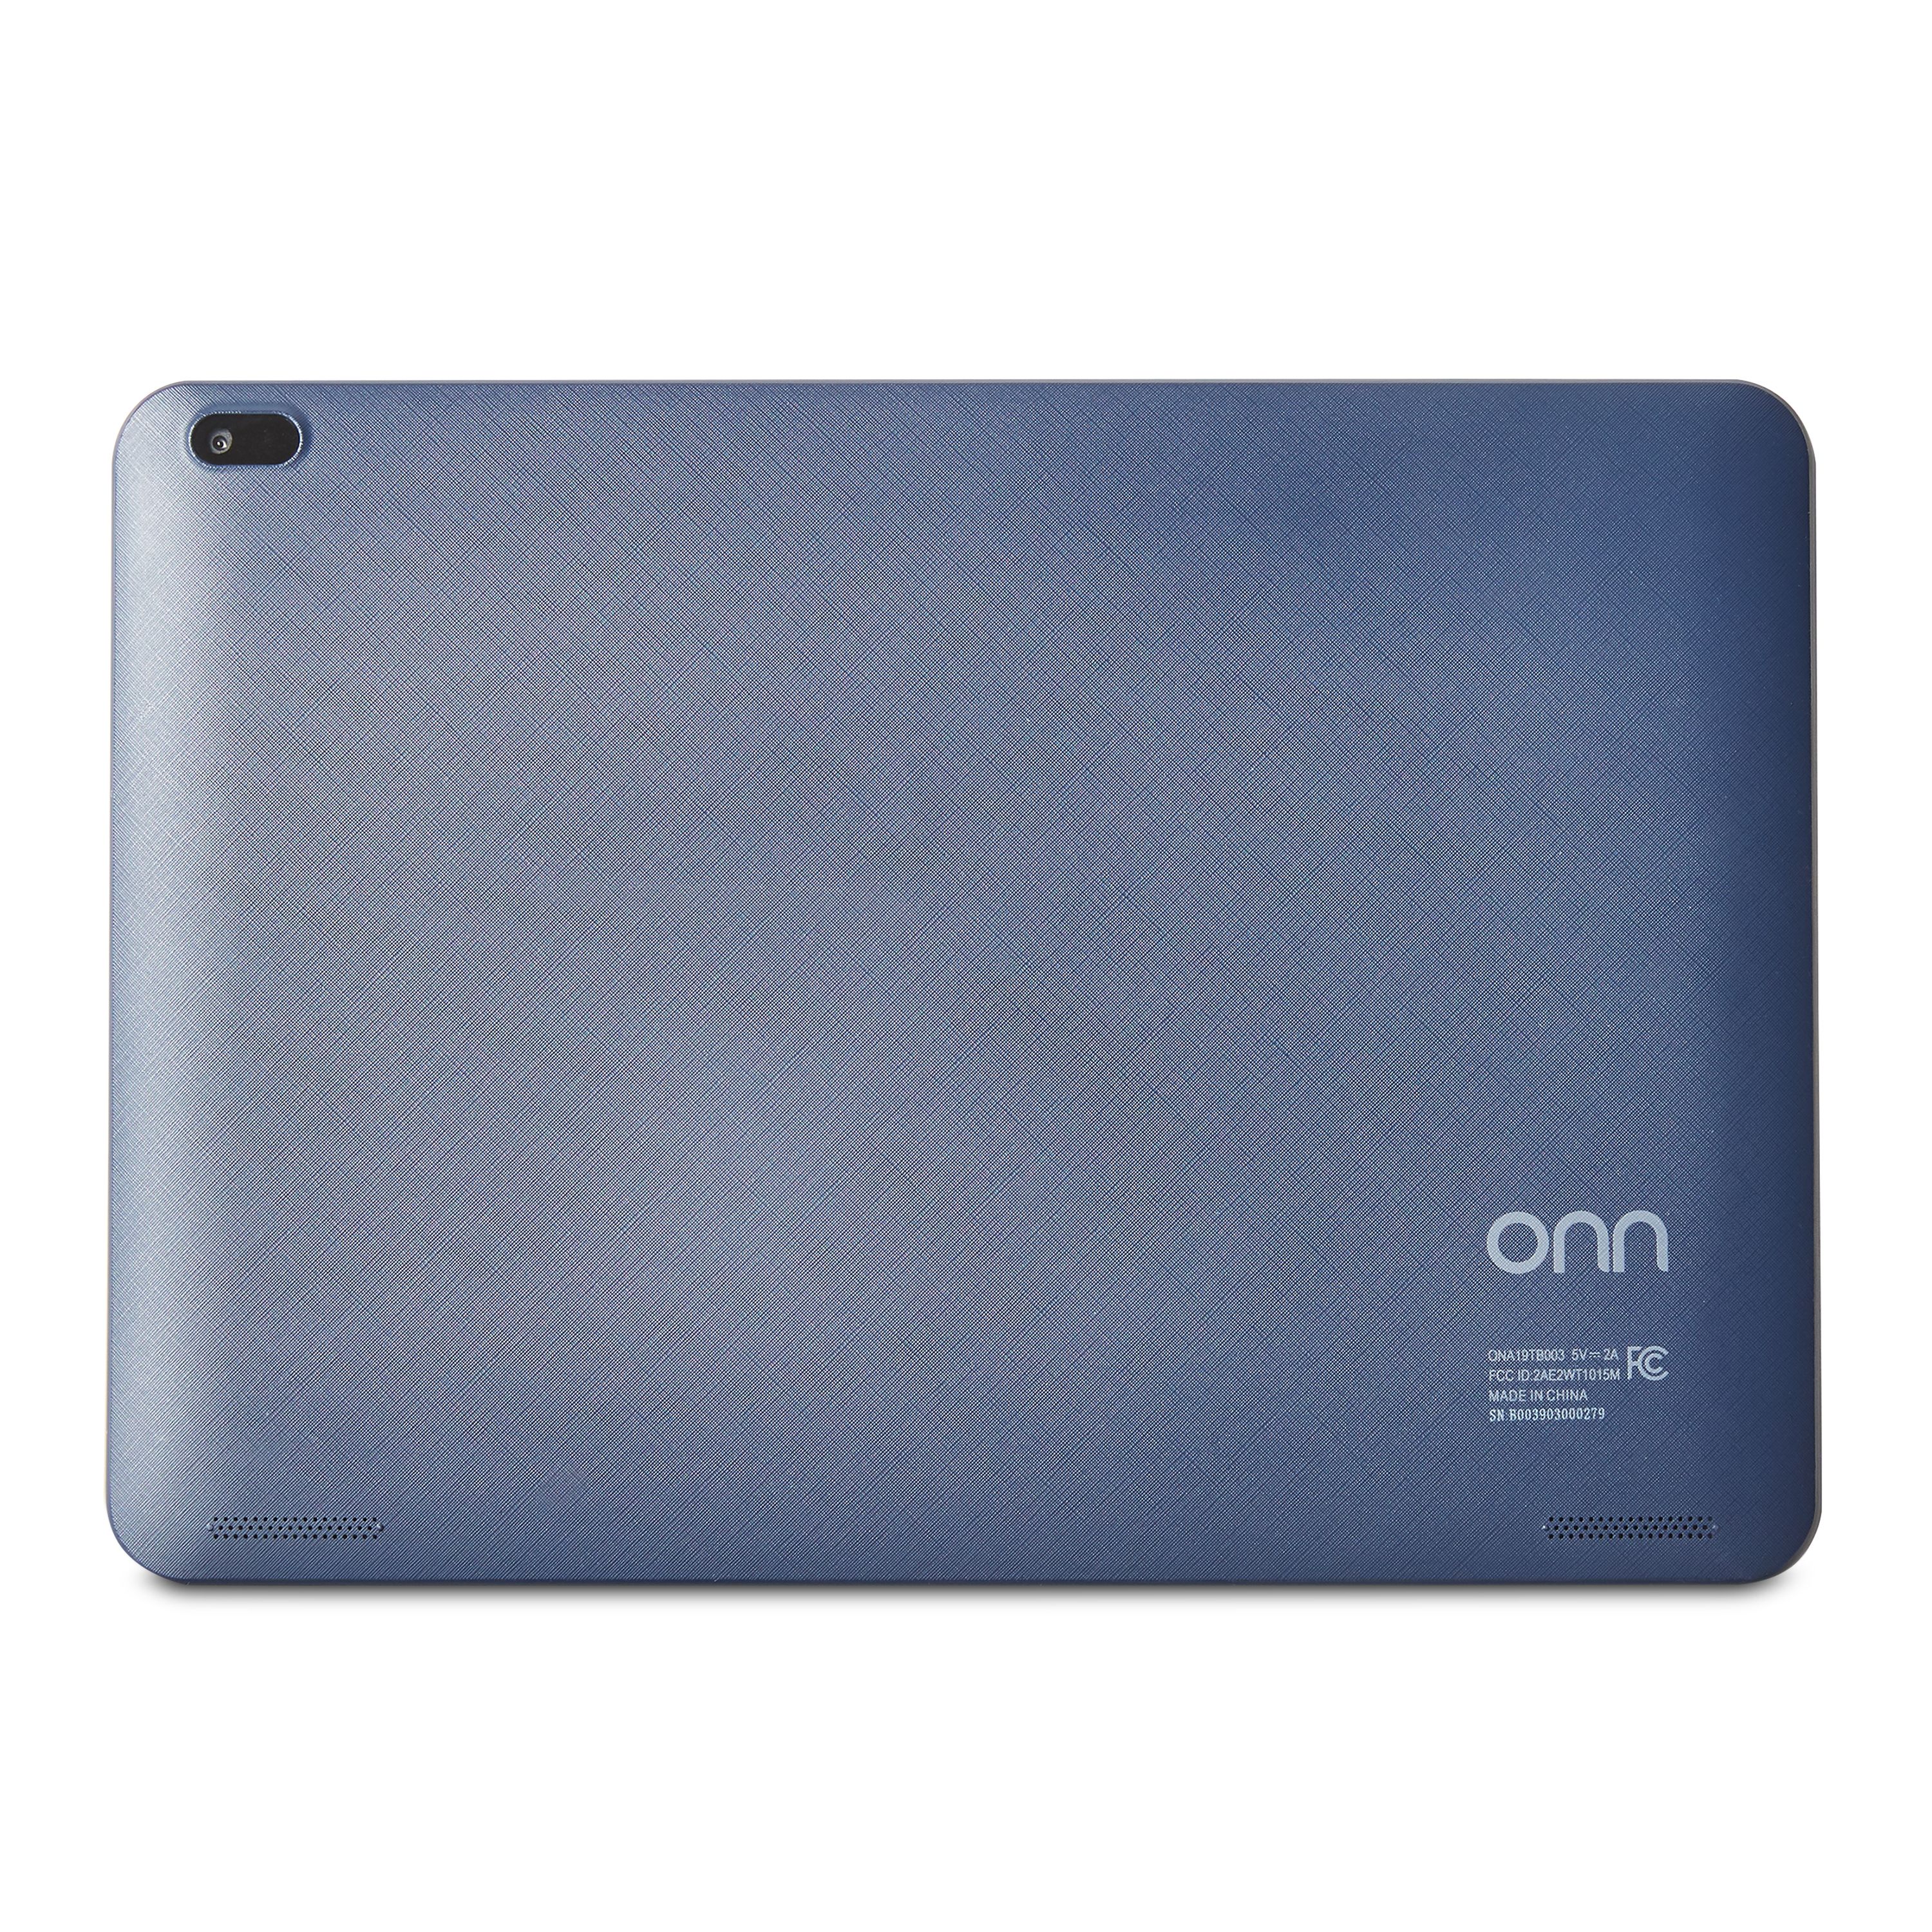 onn. 10.1" 16GB Android Tablet Computers - image 4 of 4